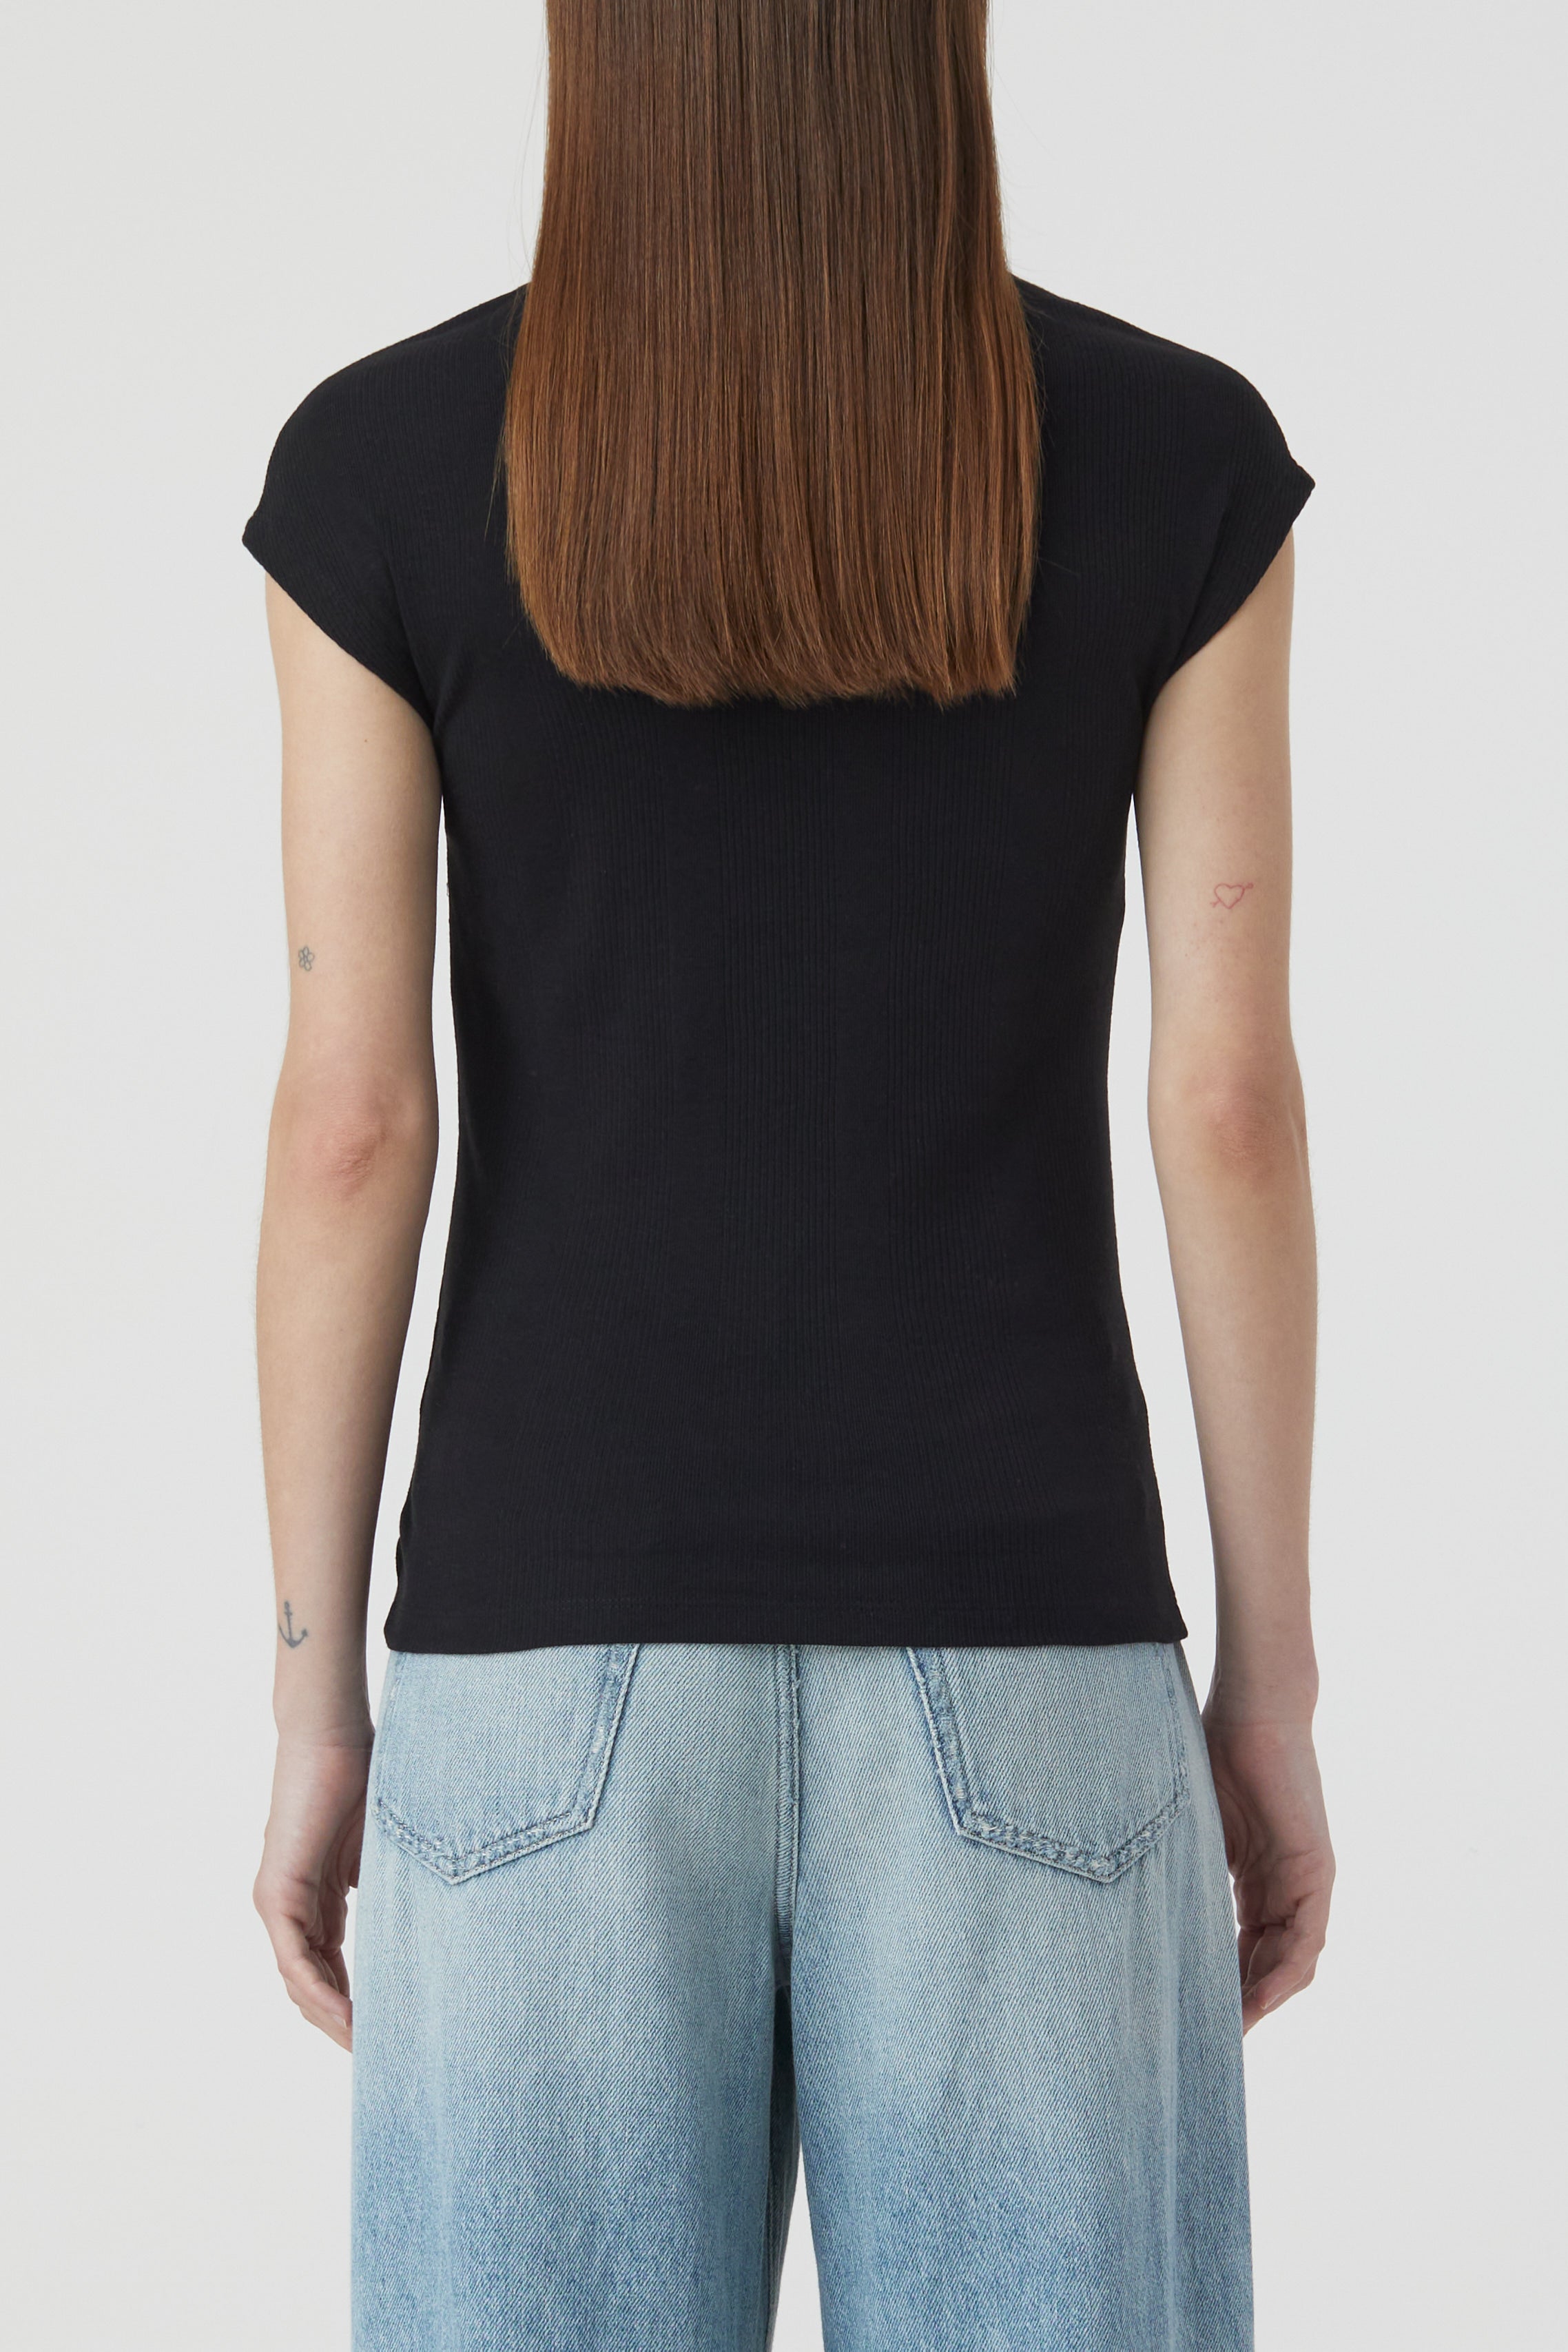 CLOSED-OUTLET-SALE-STYLE-NAME-CAP-SLEEVE-TOP-T-SHIRTS-Strick-ARCHIVE-COLLECTION-3.jpg